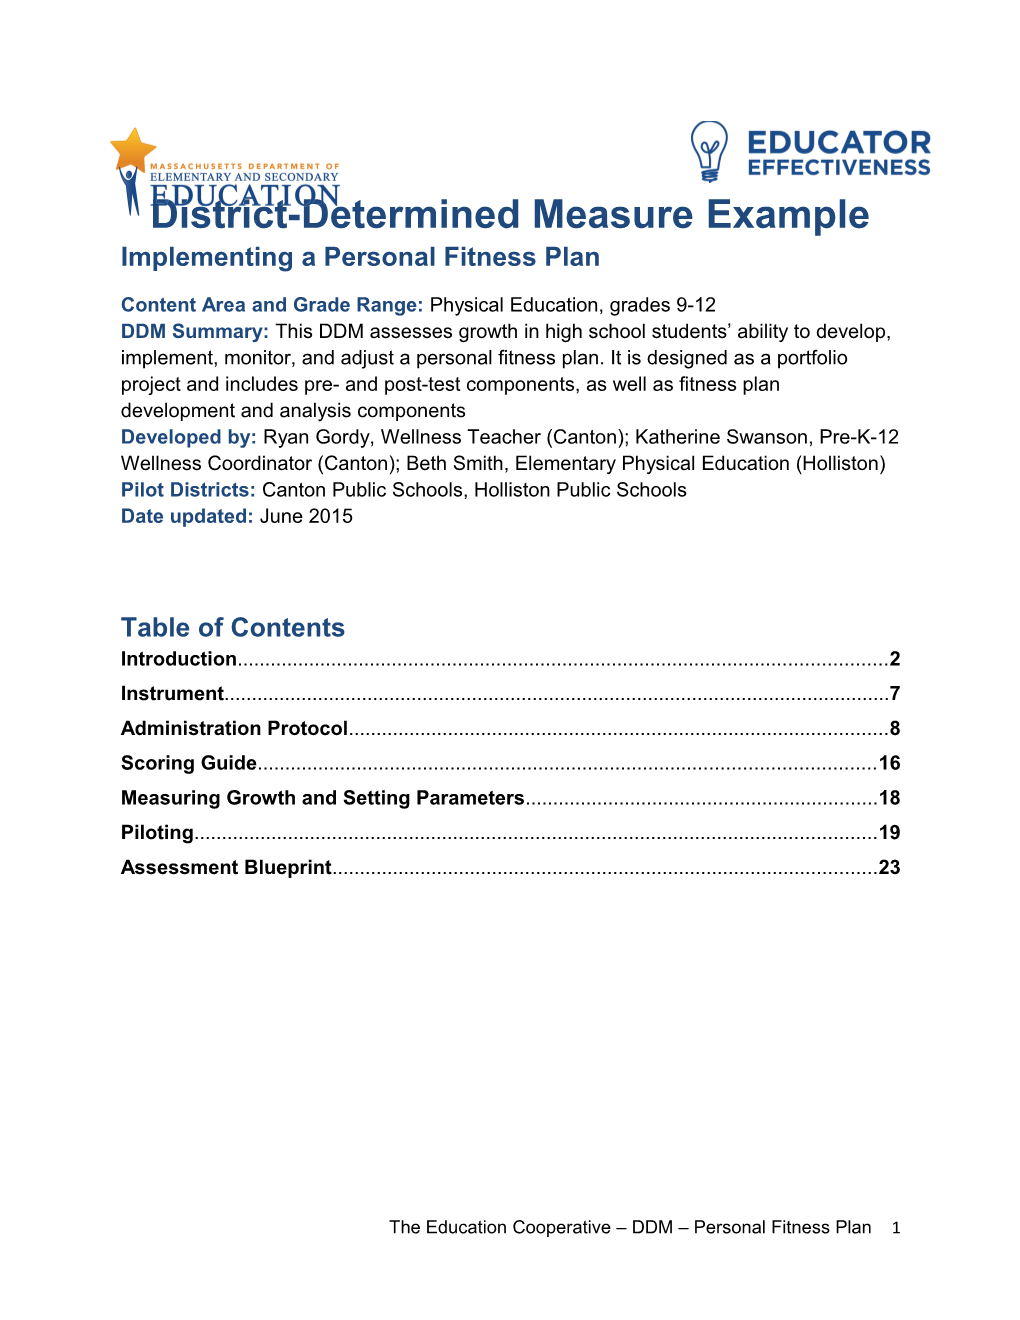 Example Common Measure: Development Report: Personal Fitness Plans for High School